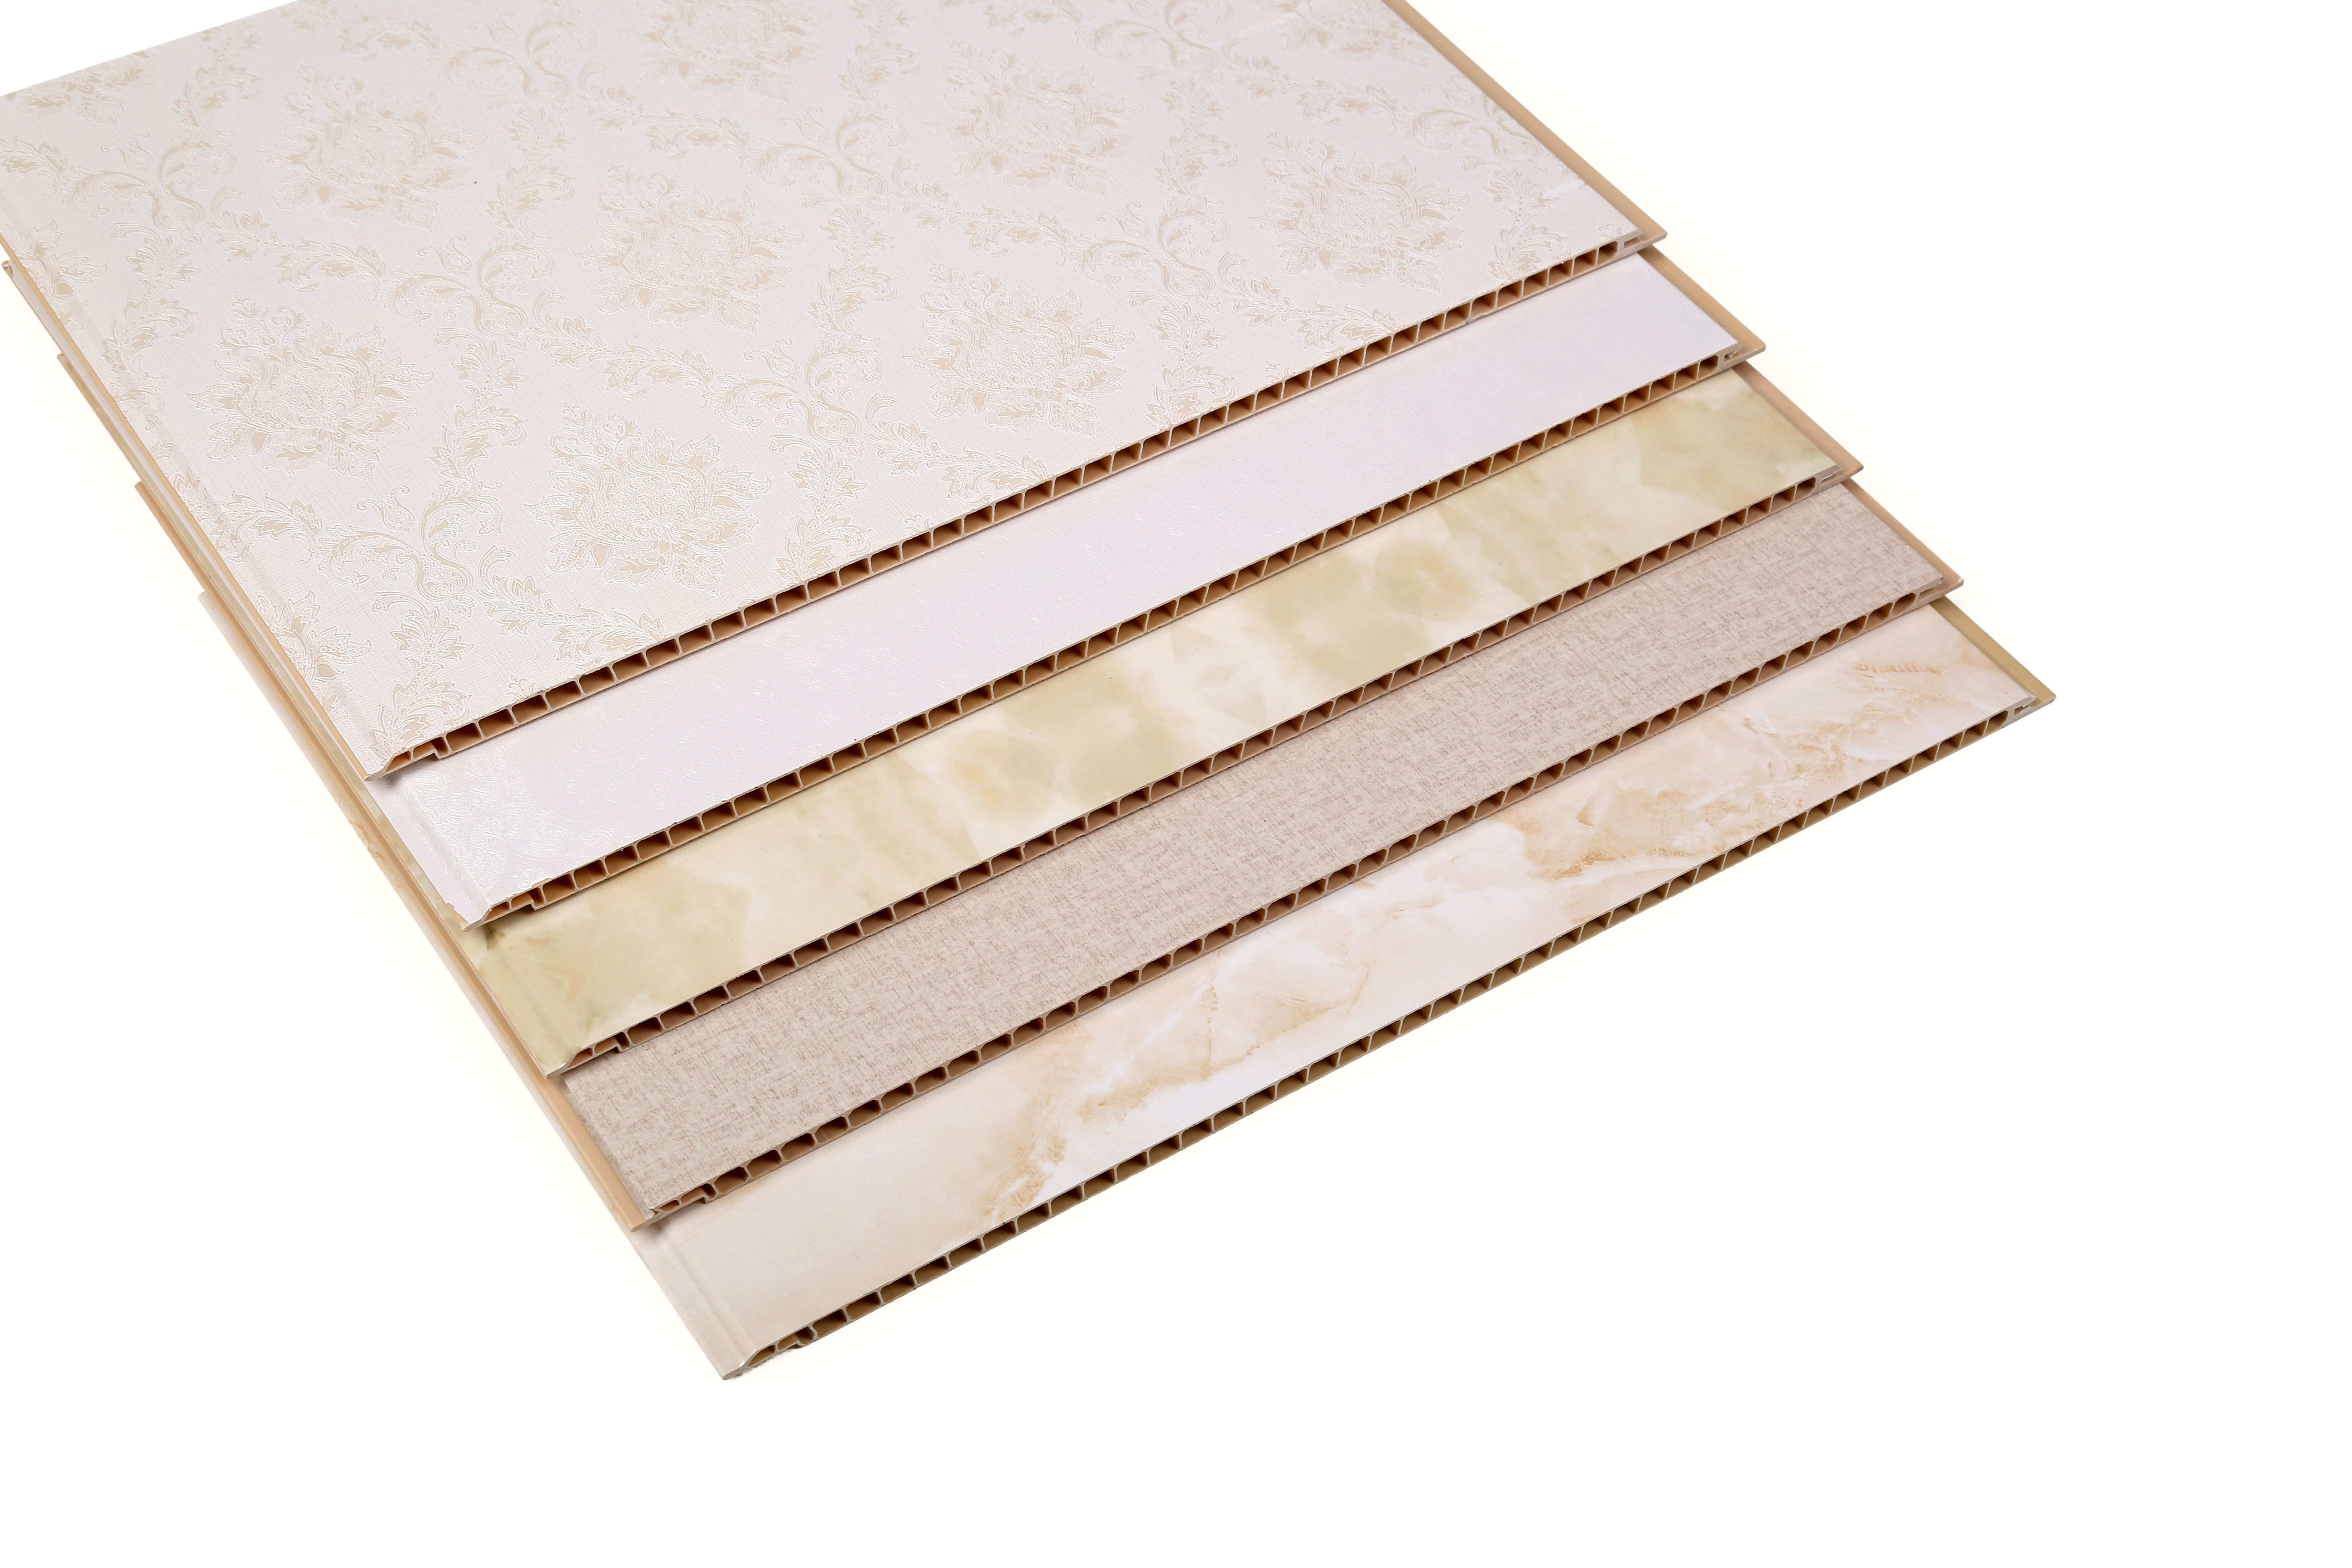 Hot sale Pvc Ceiling Board Price -
 400*9mm,V groove/Flat  PVC Wall Panel – Chinatide